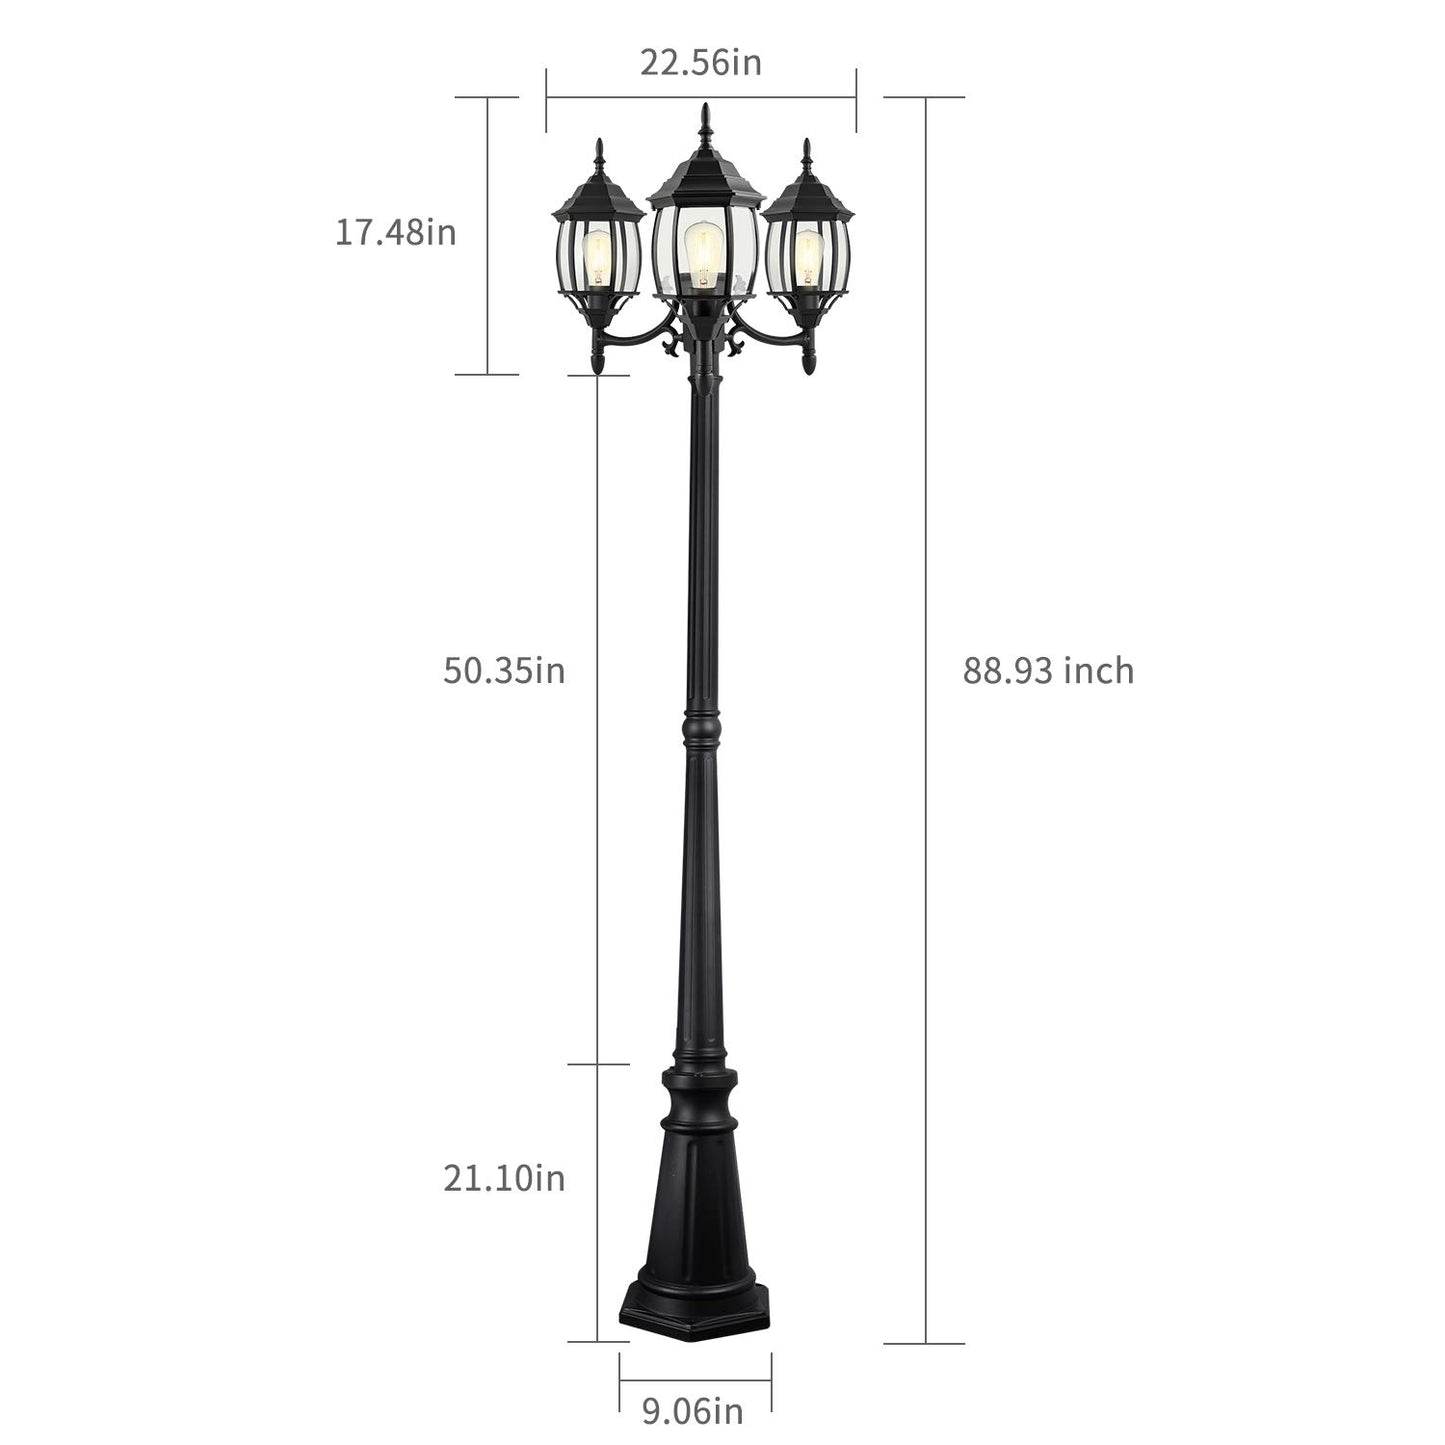 PARTPHONER Outdoor Lamp Post Light 3-Head, Classic Black Light Pole with Clear Glass Panels, E26 Base Maximum 100W (3 LED Bulbs Included), Waterproof Street Light for Backyard, Garden, Driveway